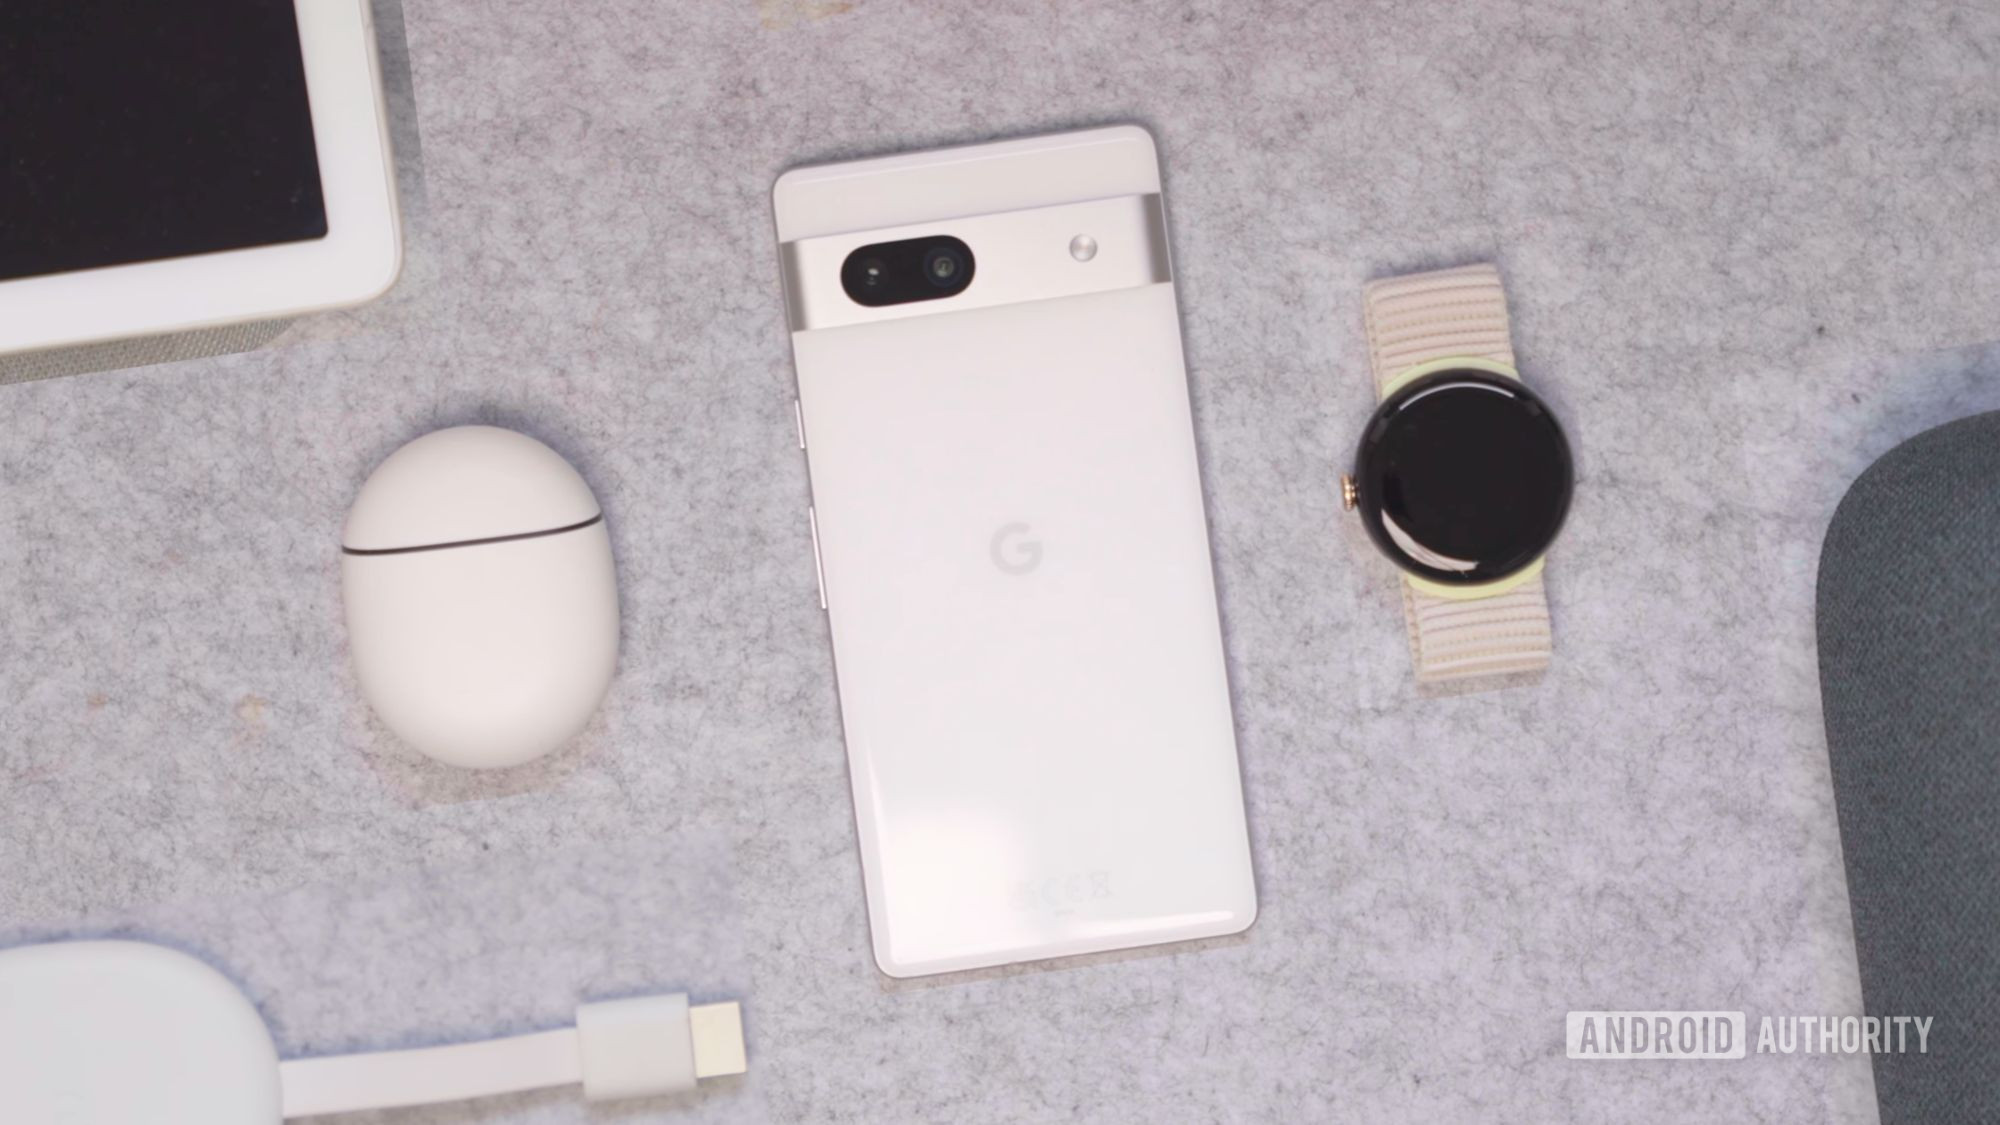 A full Google Pixel ecosystem for under $1,000? Challenge accepted!